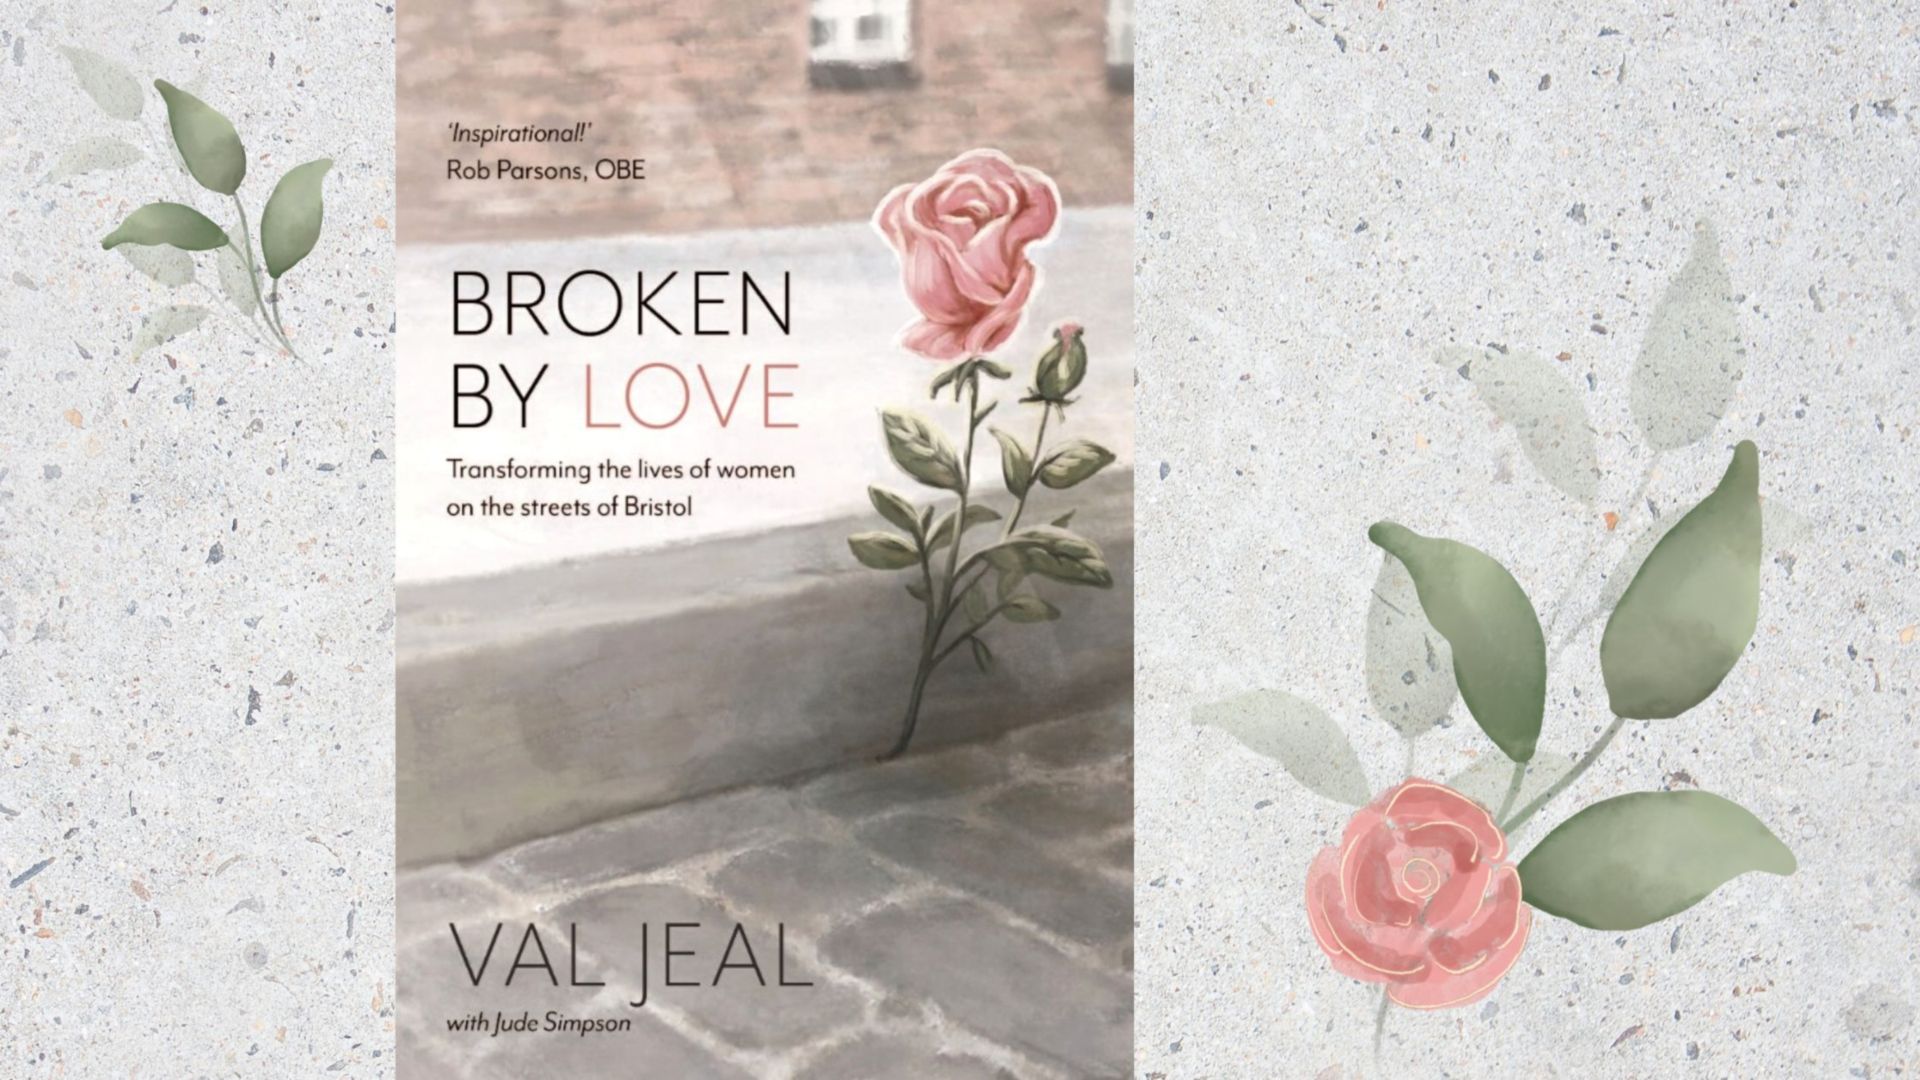 Interview with Val Jeal, author of 'Broken by Love'